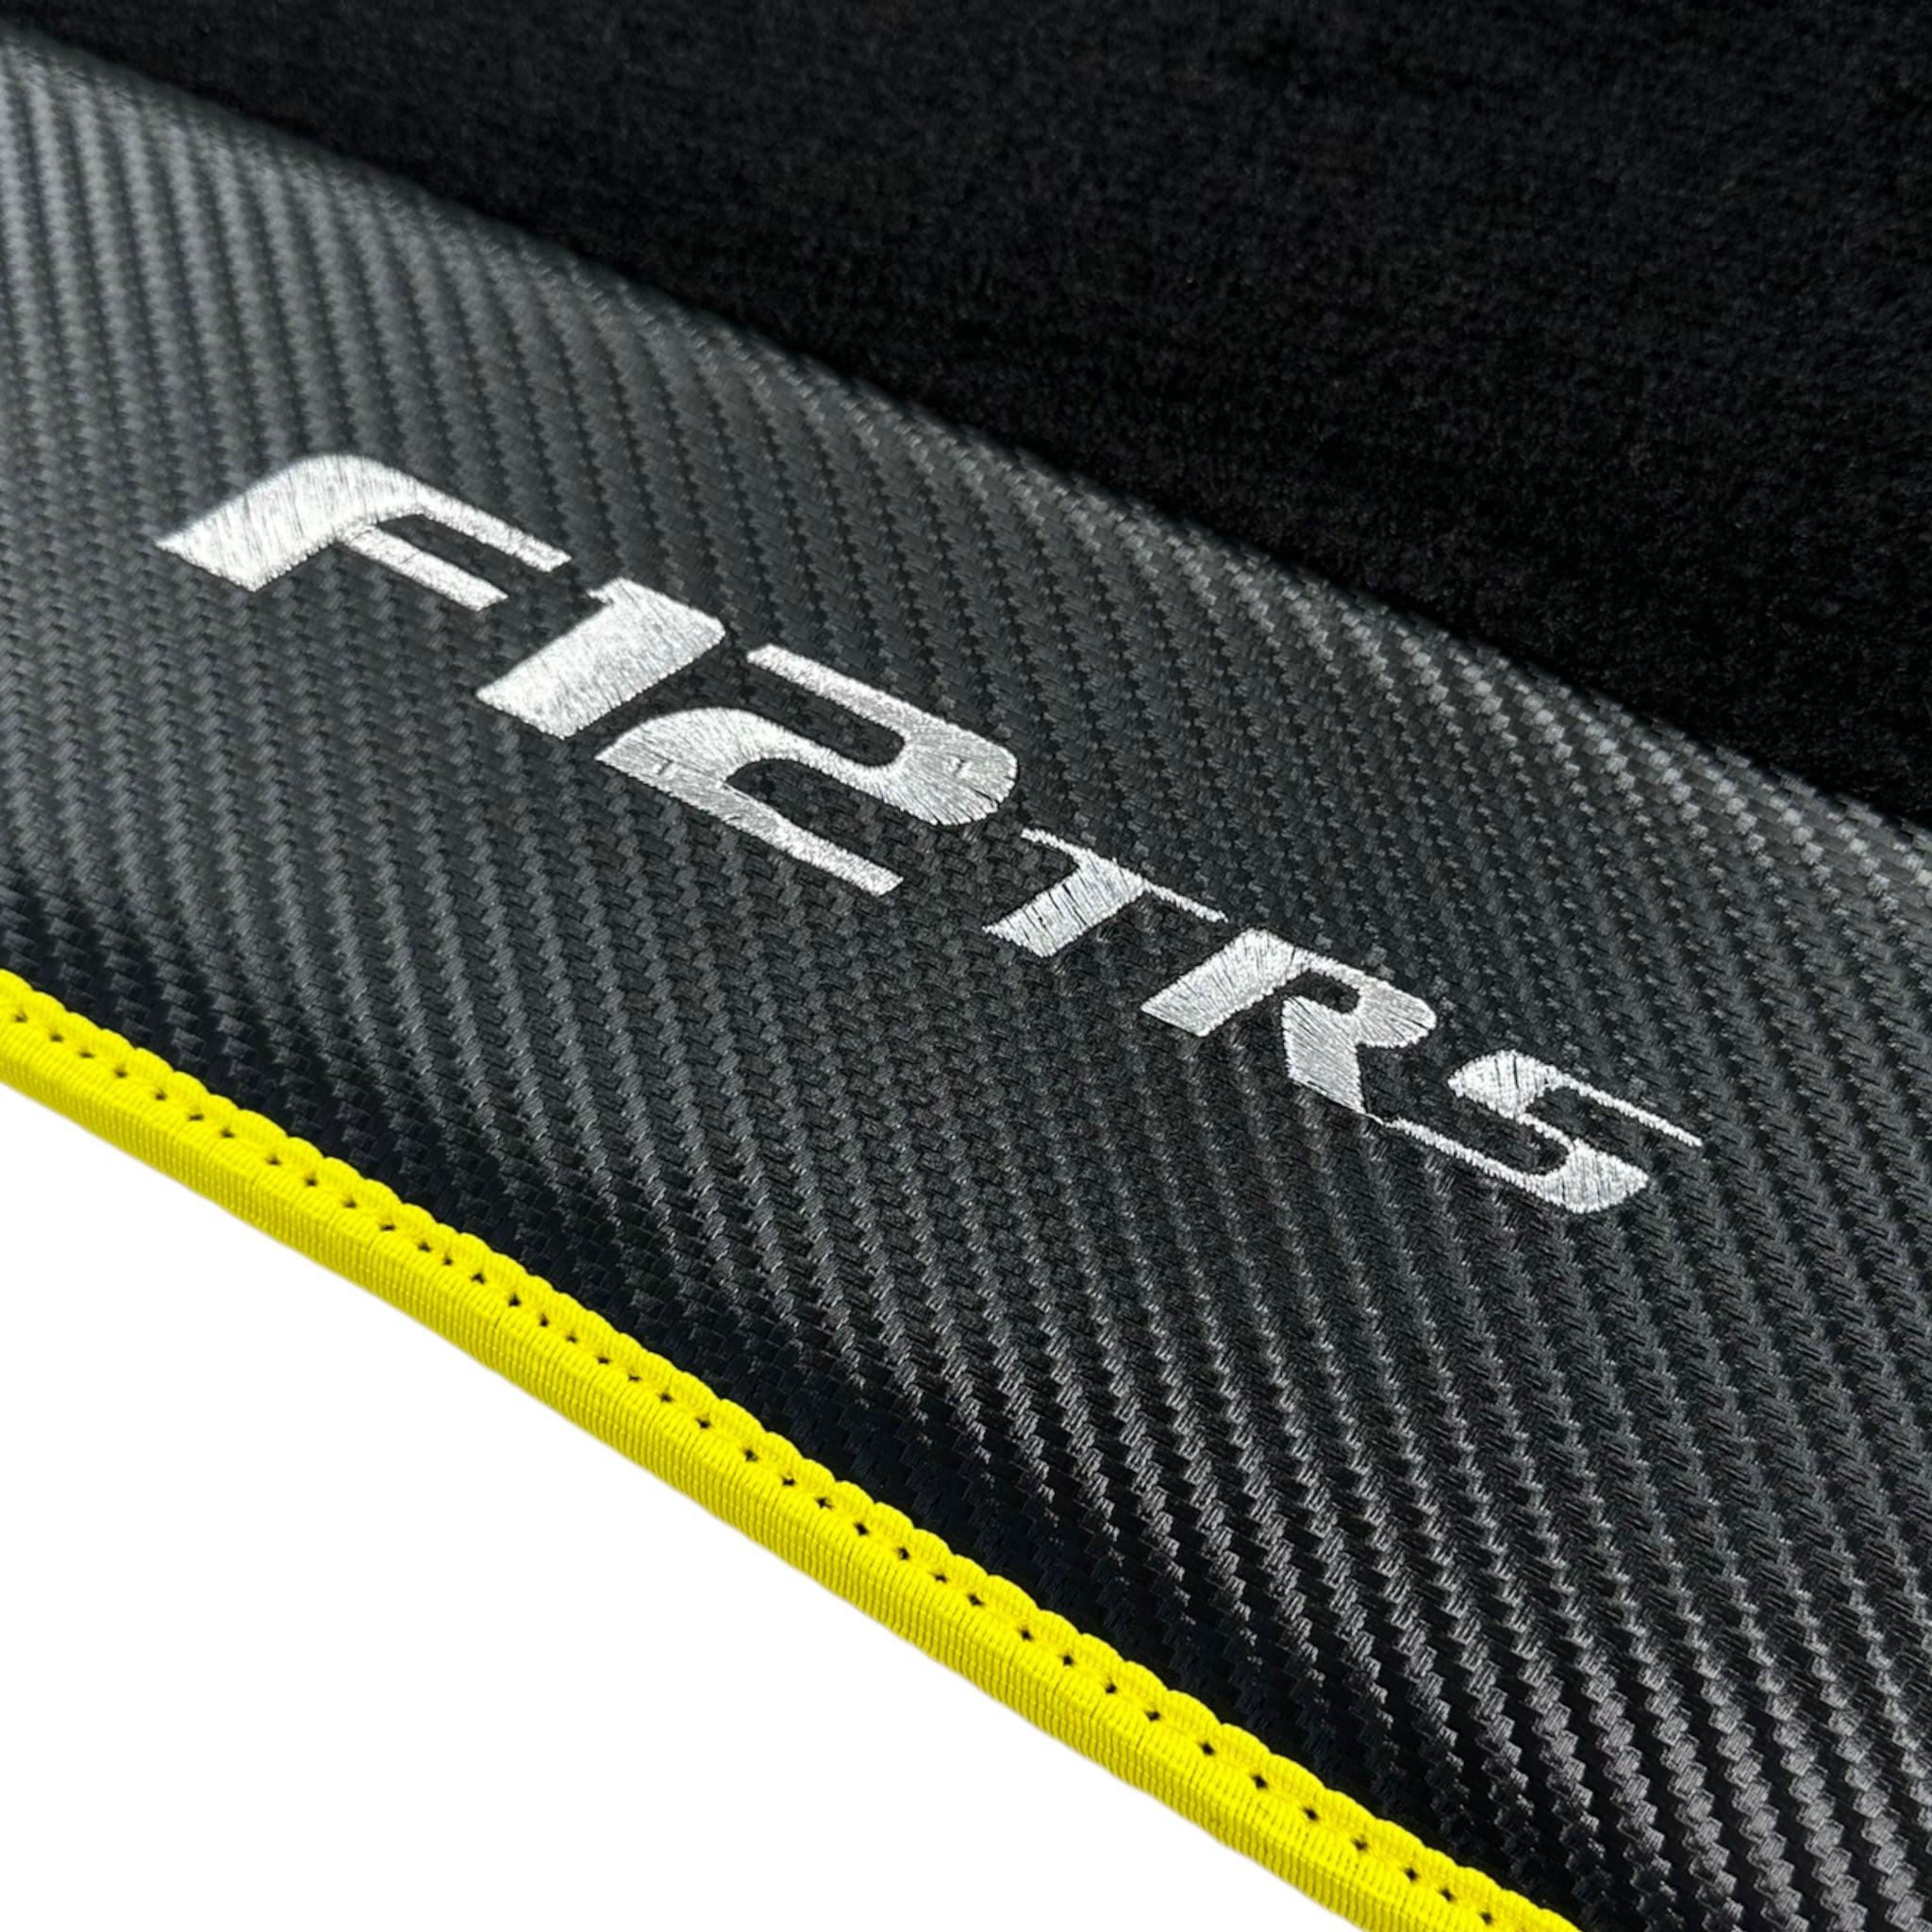 Black Floor Mats for Ferrari F12 TRS (2014) with Carbon Leather